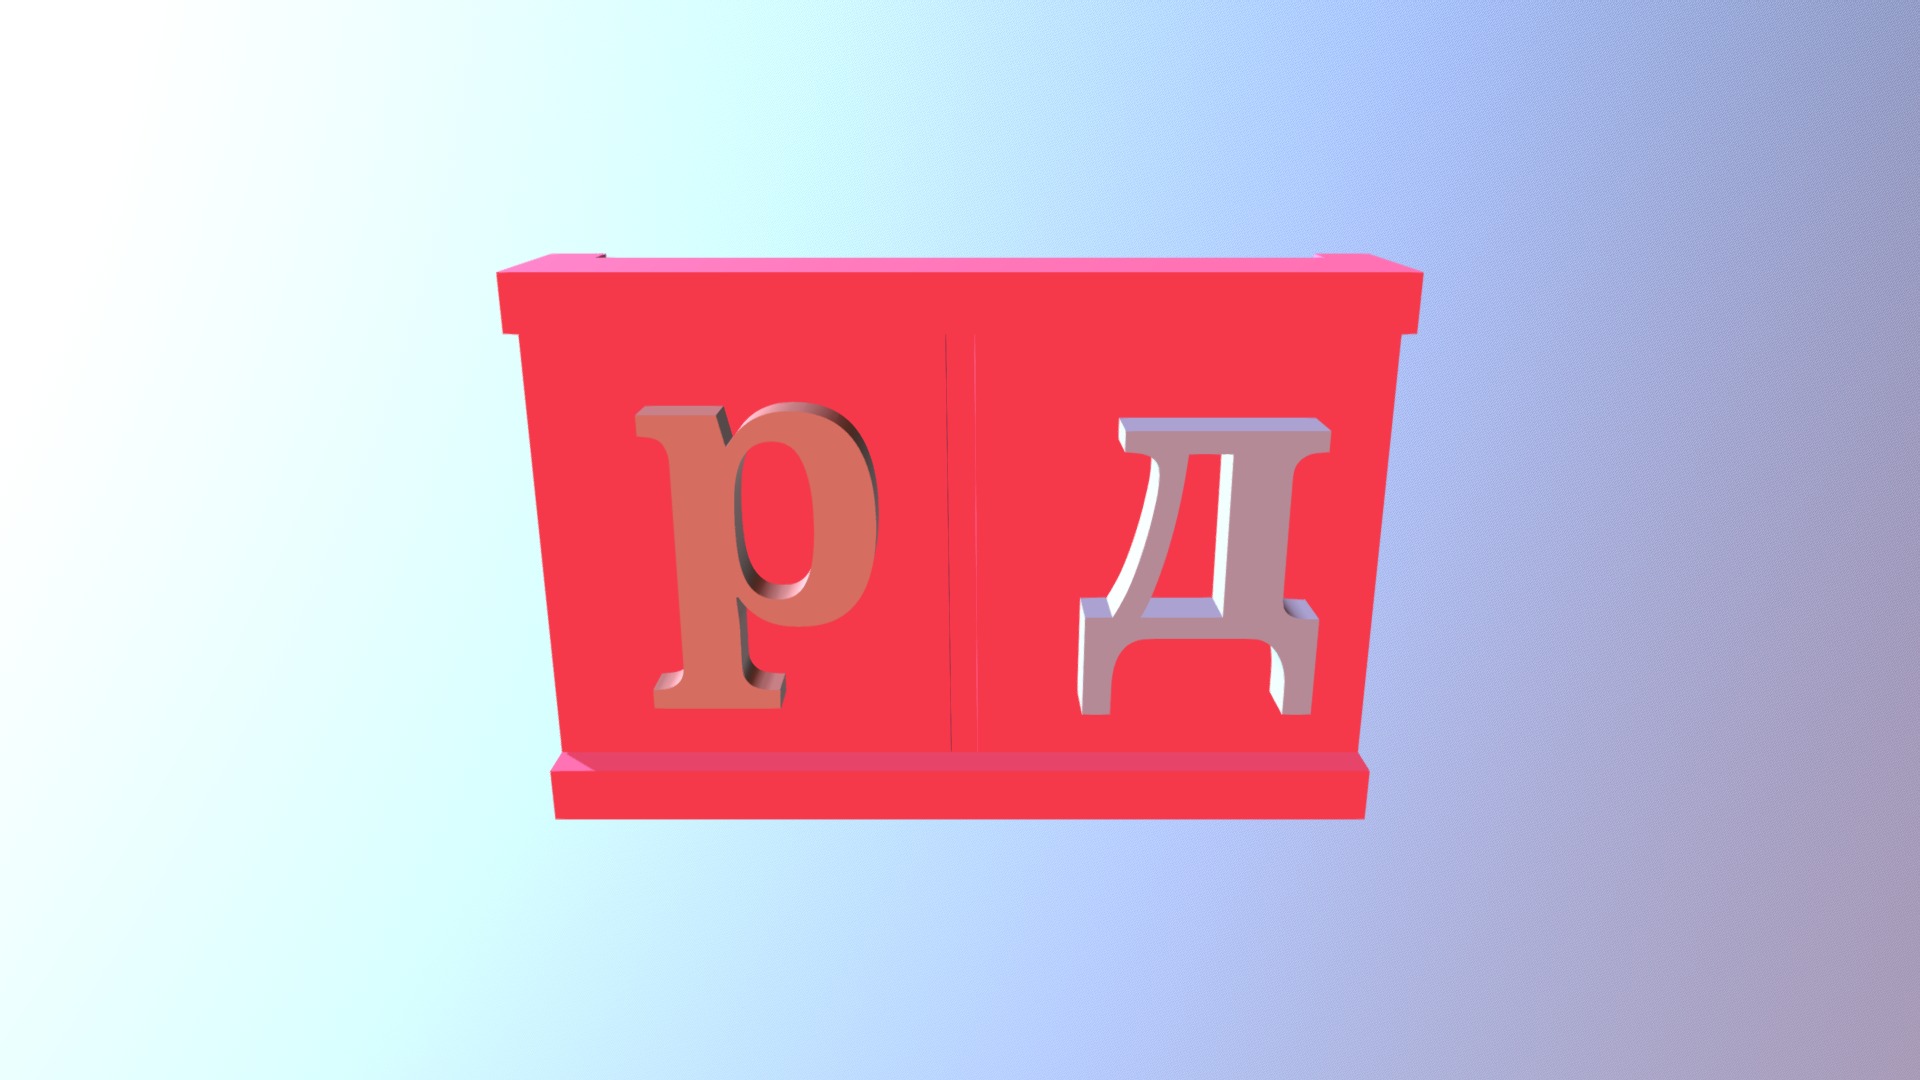 3D model рд -домине - This is a 3D model of the рд -домине. The 3D model is about a red square with white text.